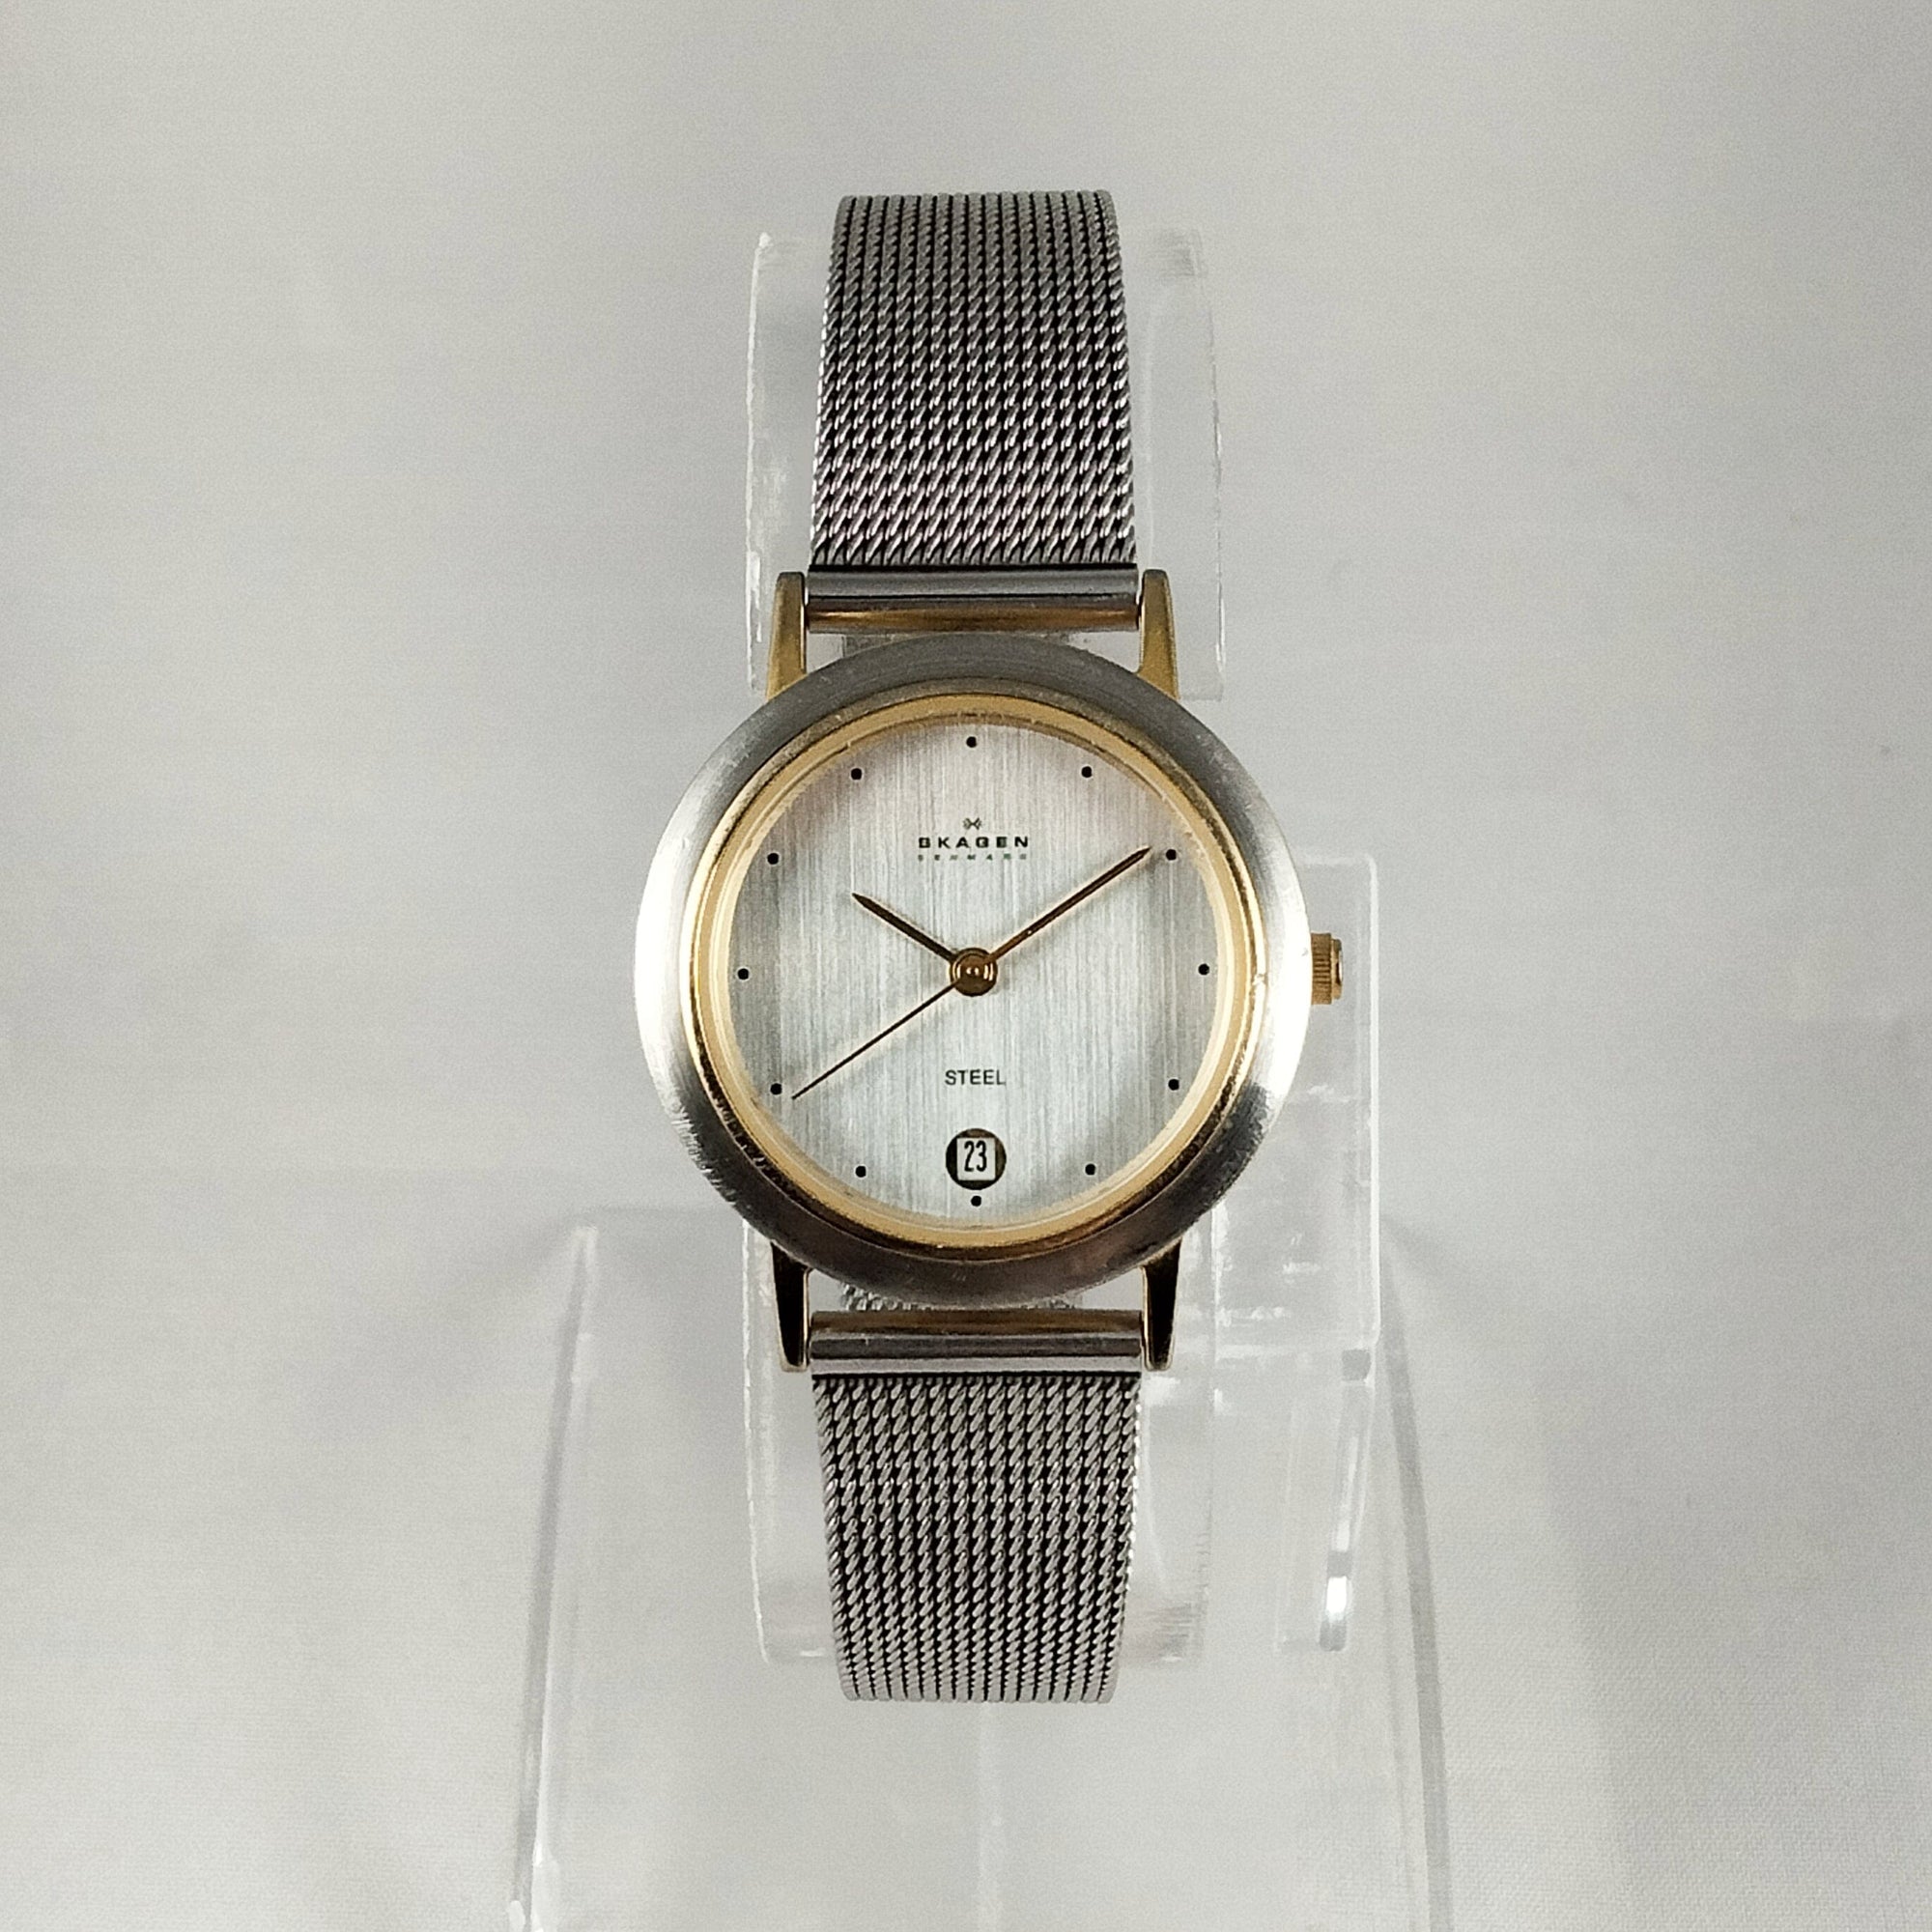 I Like Mikes Mid Century Modern Watches Skagen Stainless Steel Women's Watch, Gold Tone Details, Mesh Strap